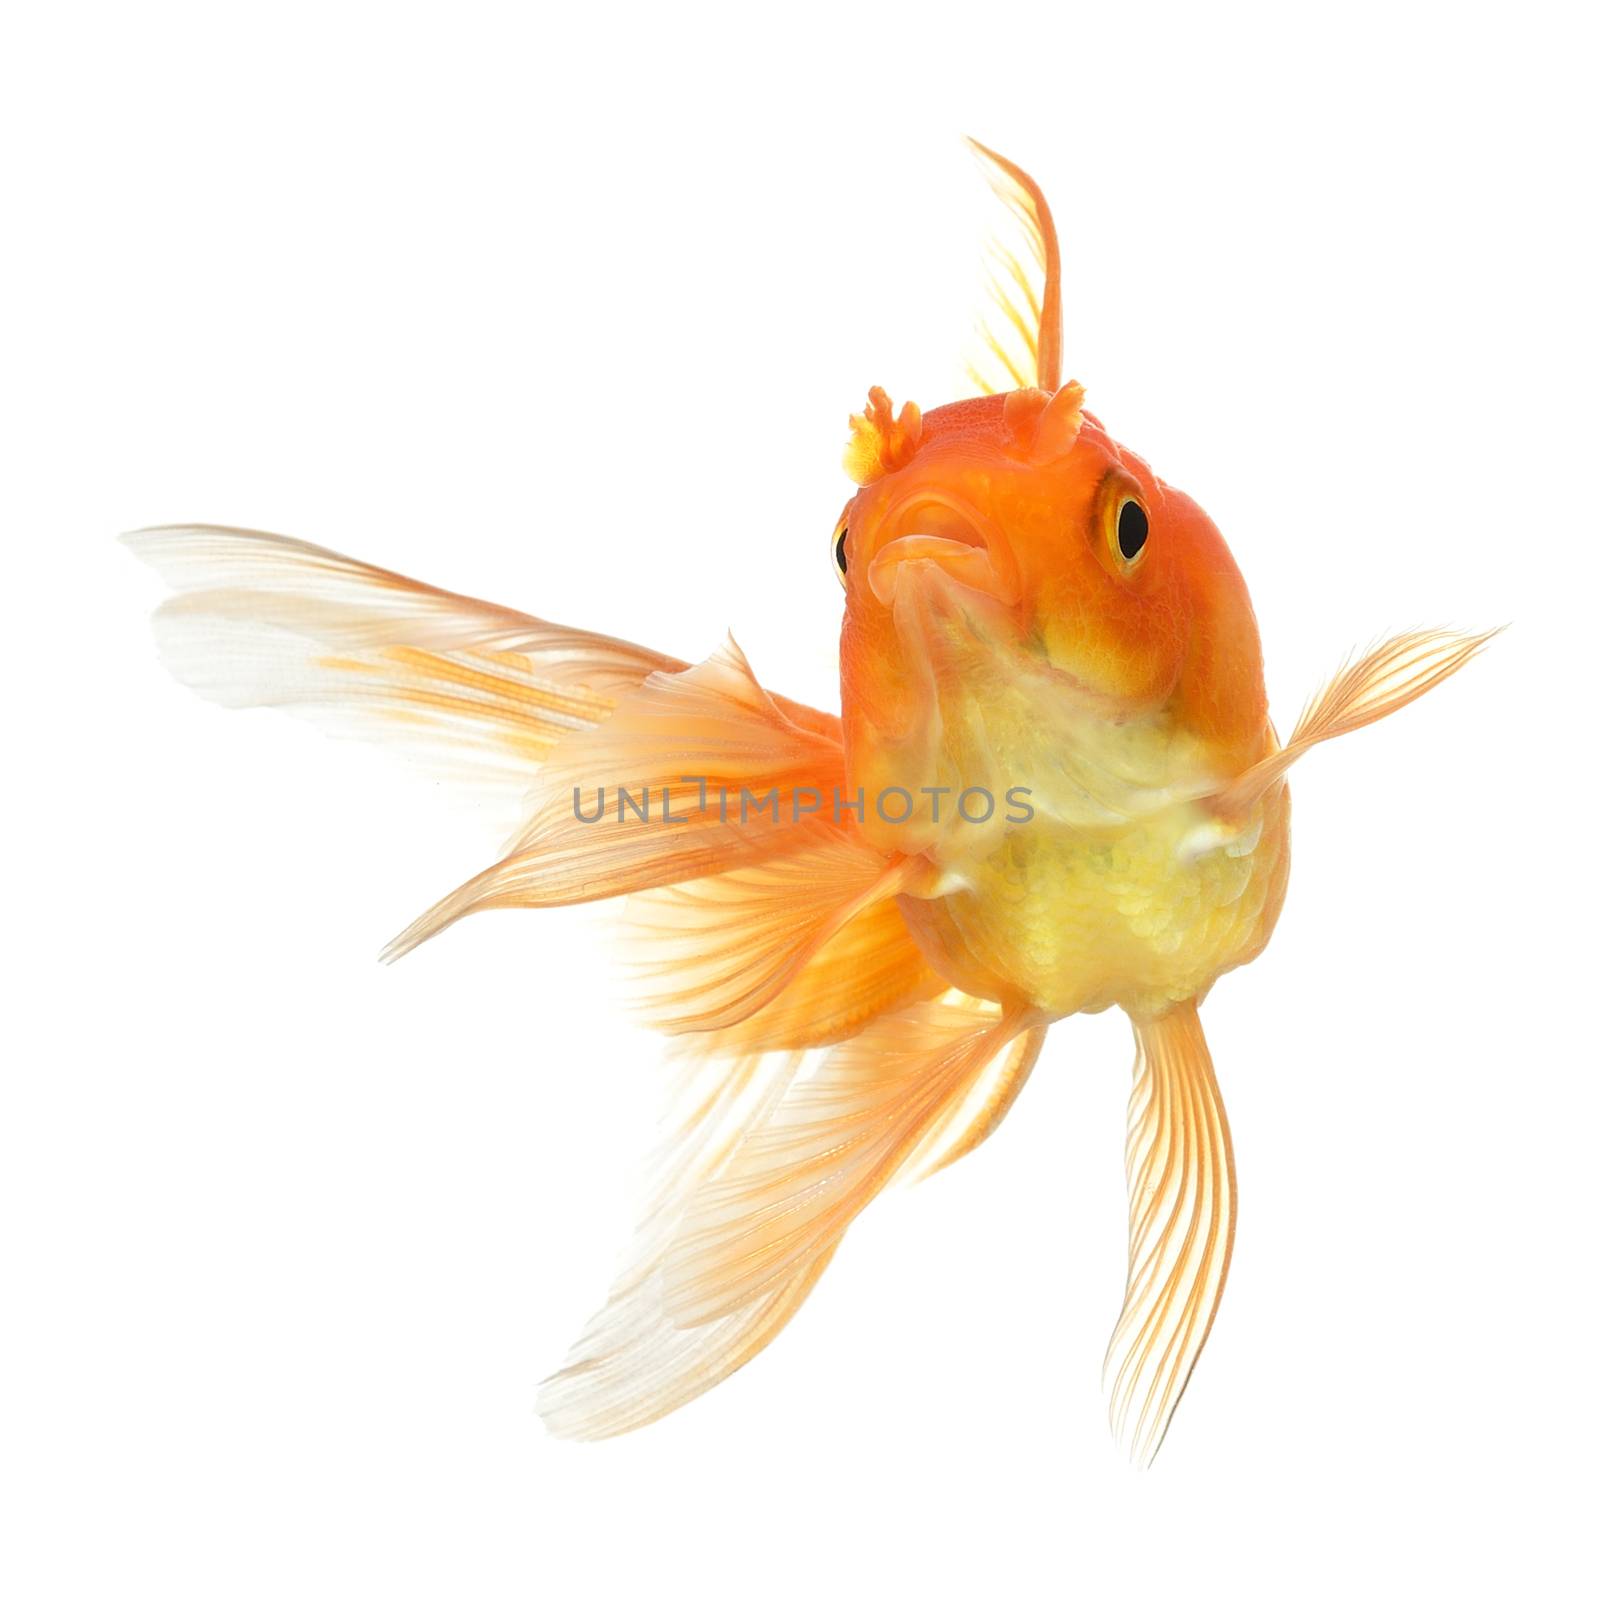 gold fish isolated on white background